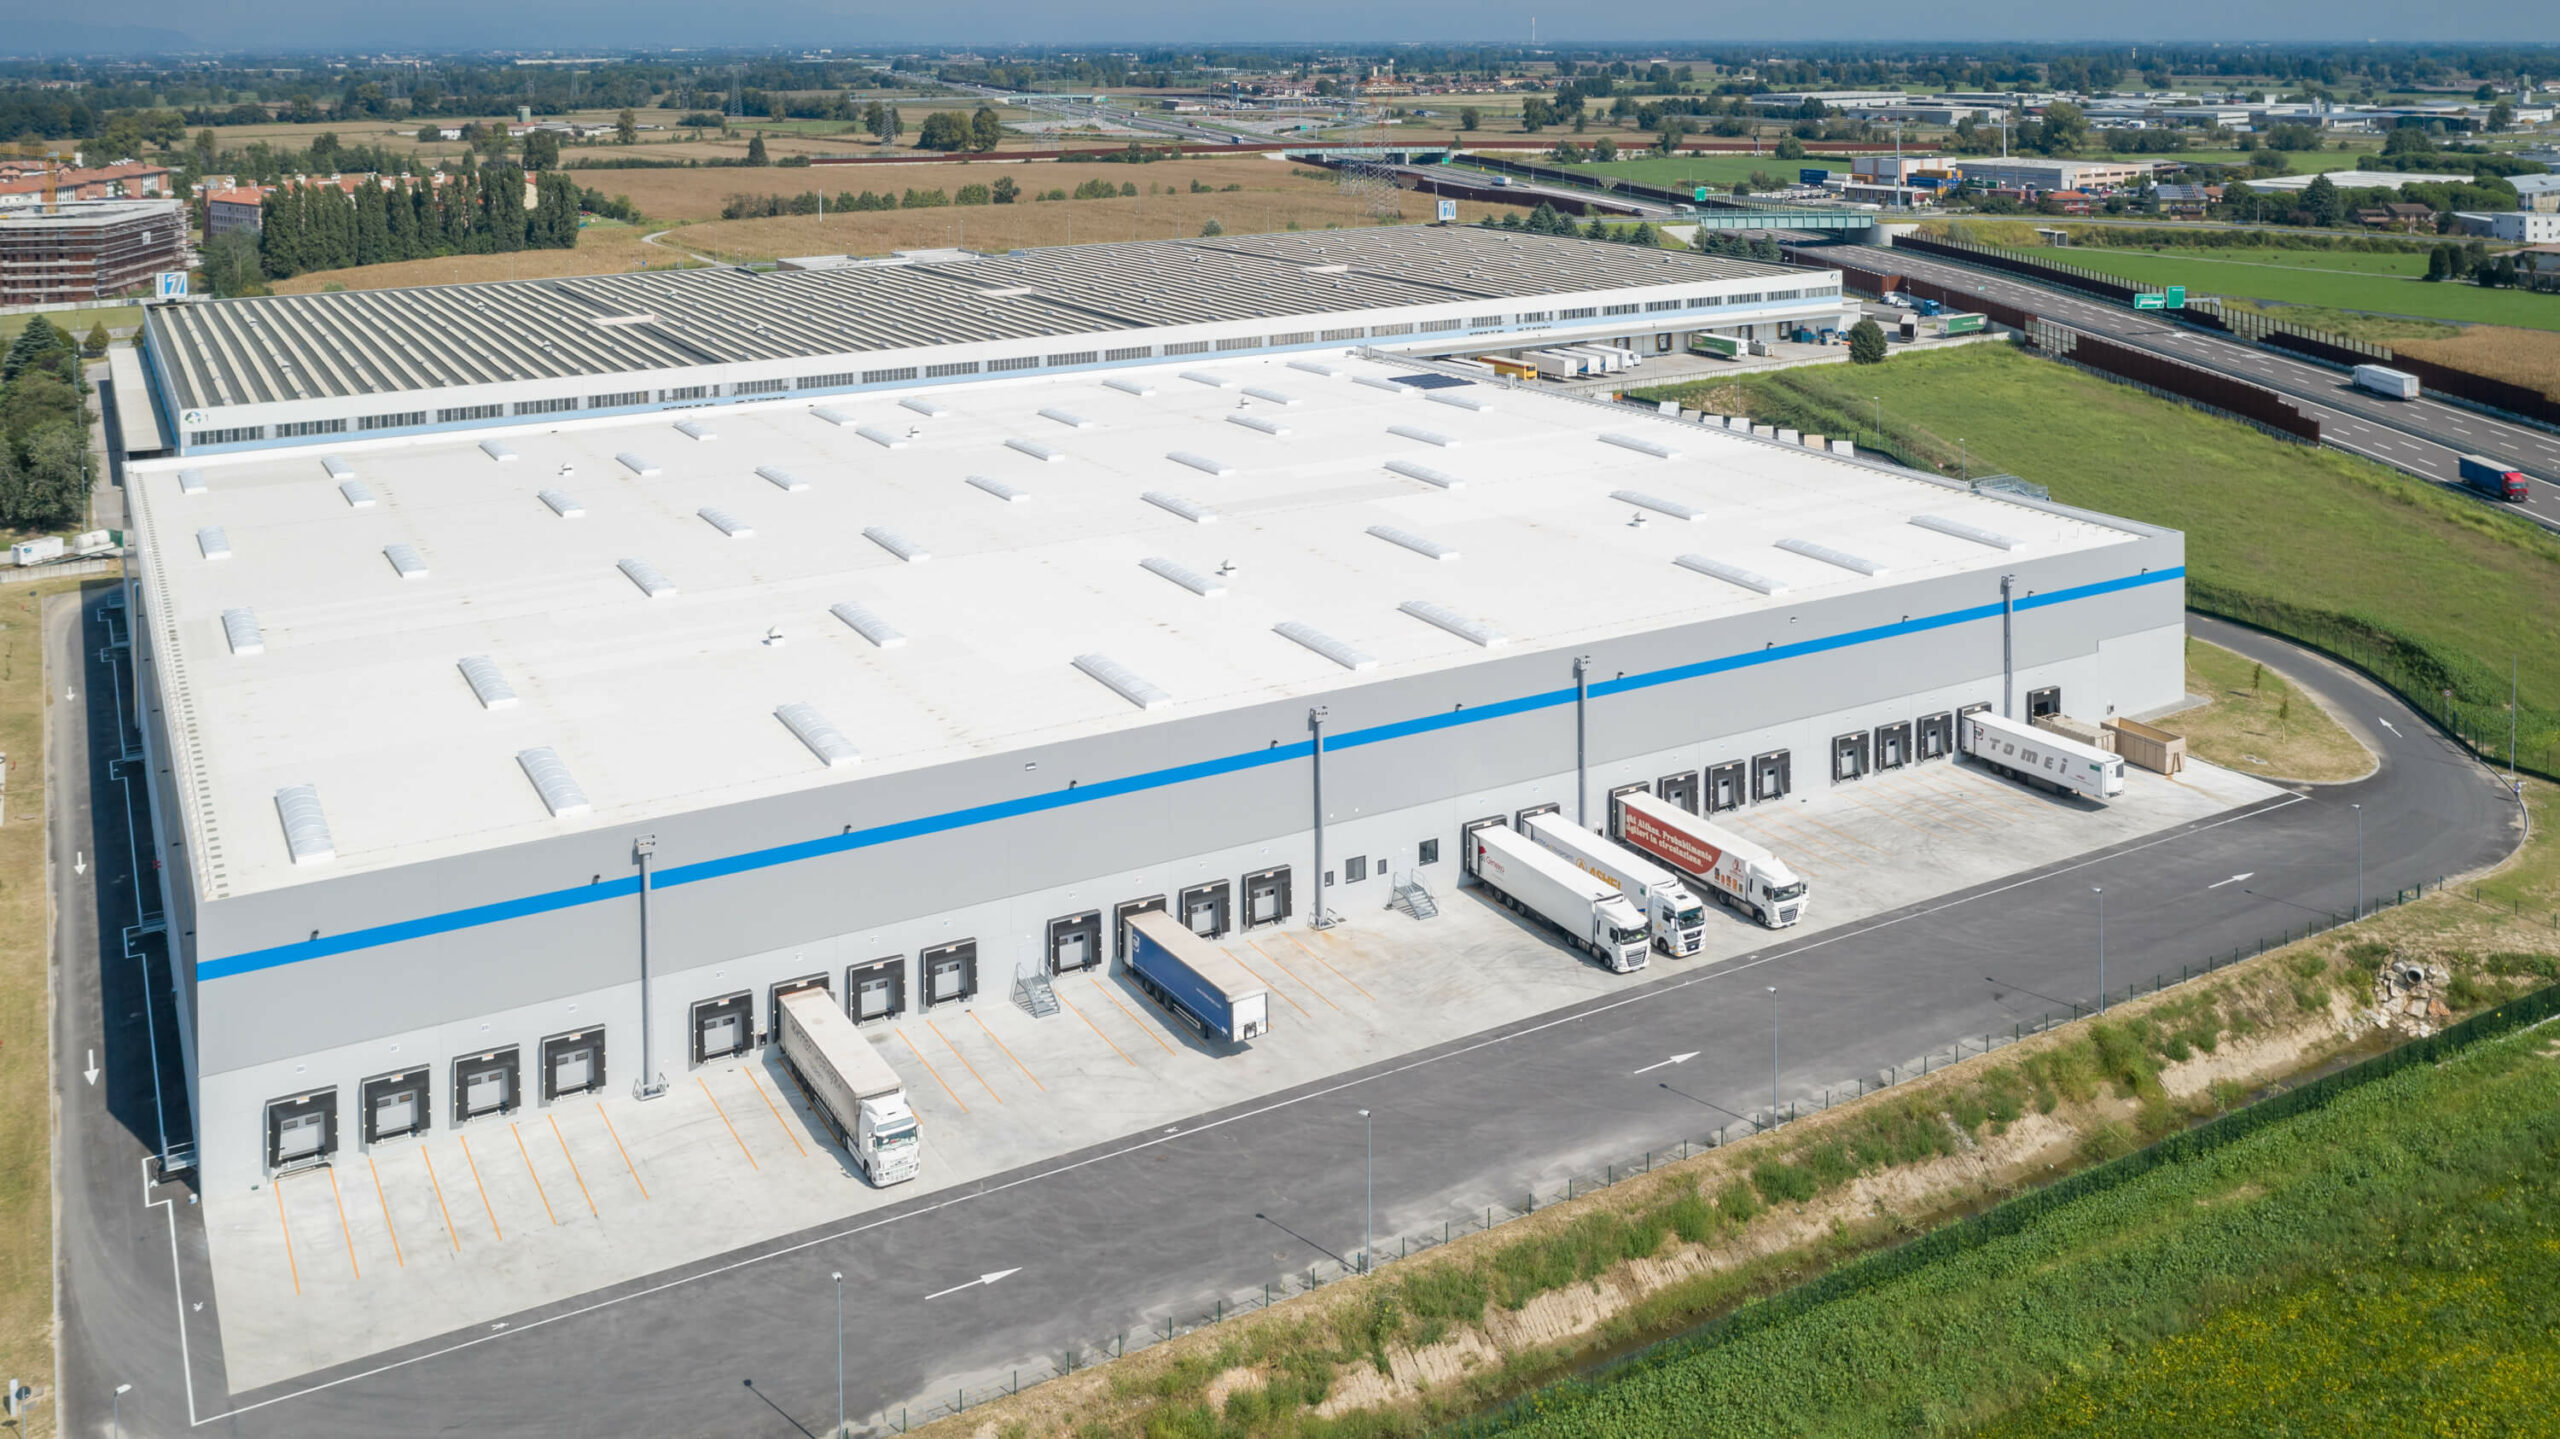 GSE STREGHTENS ITS PRESENCE IN ITALY WITH A LOGISTICS PLATFORM PROJECT NEAR MILAN